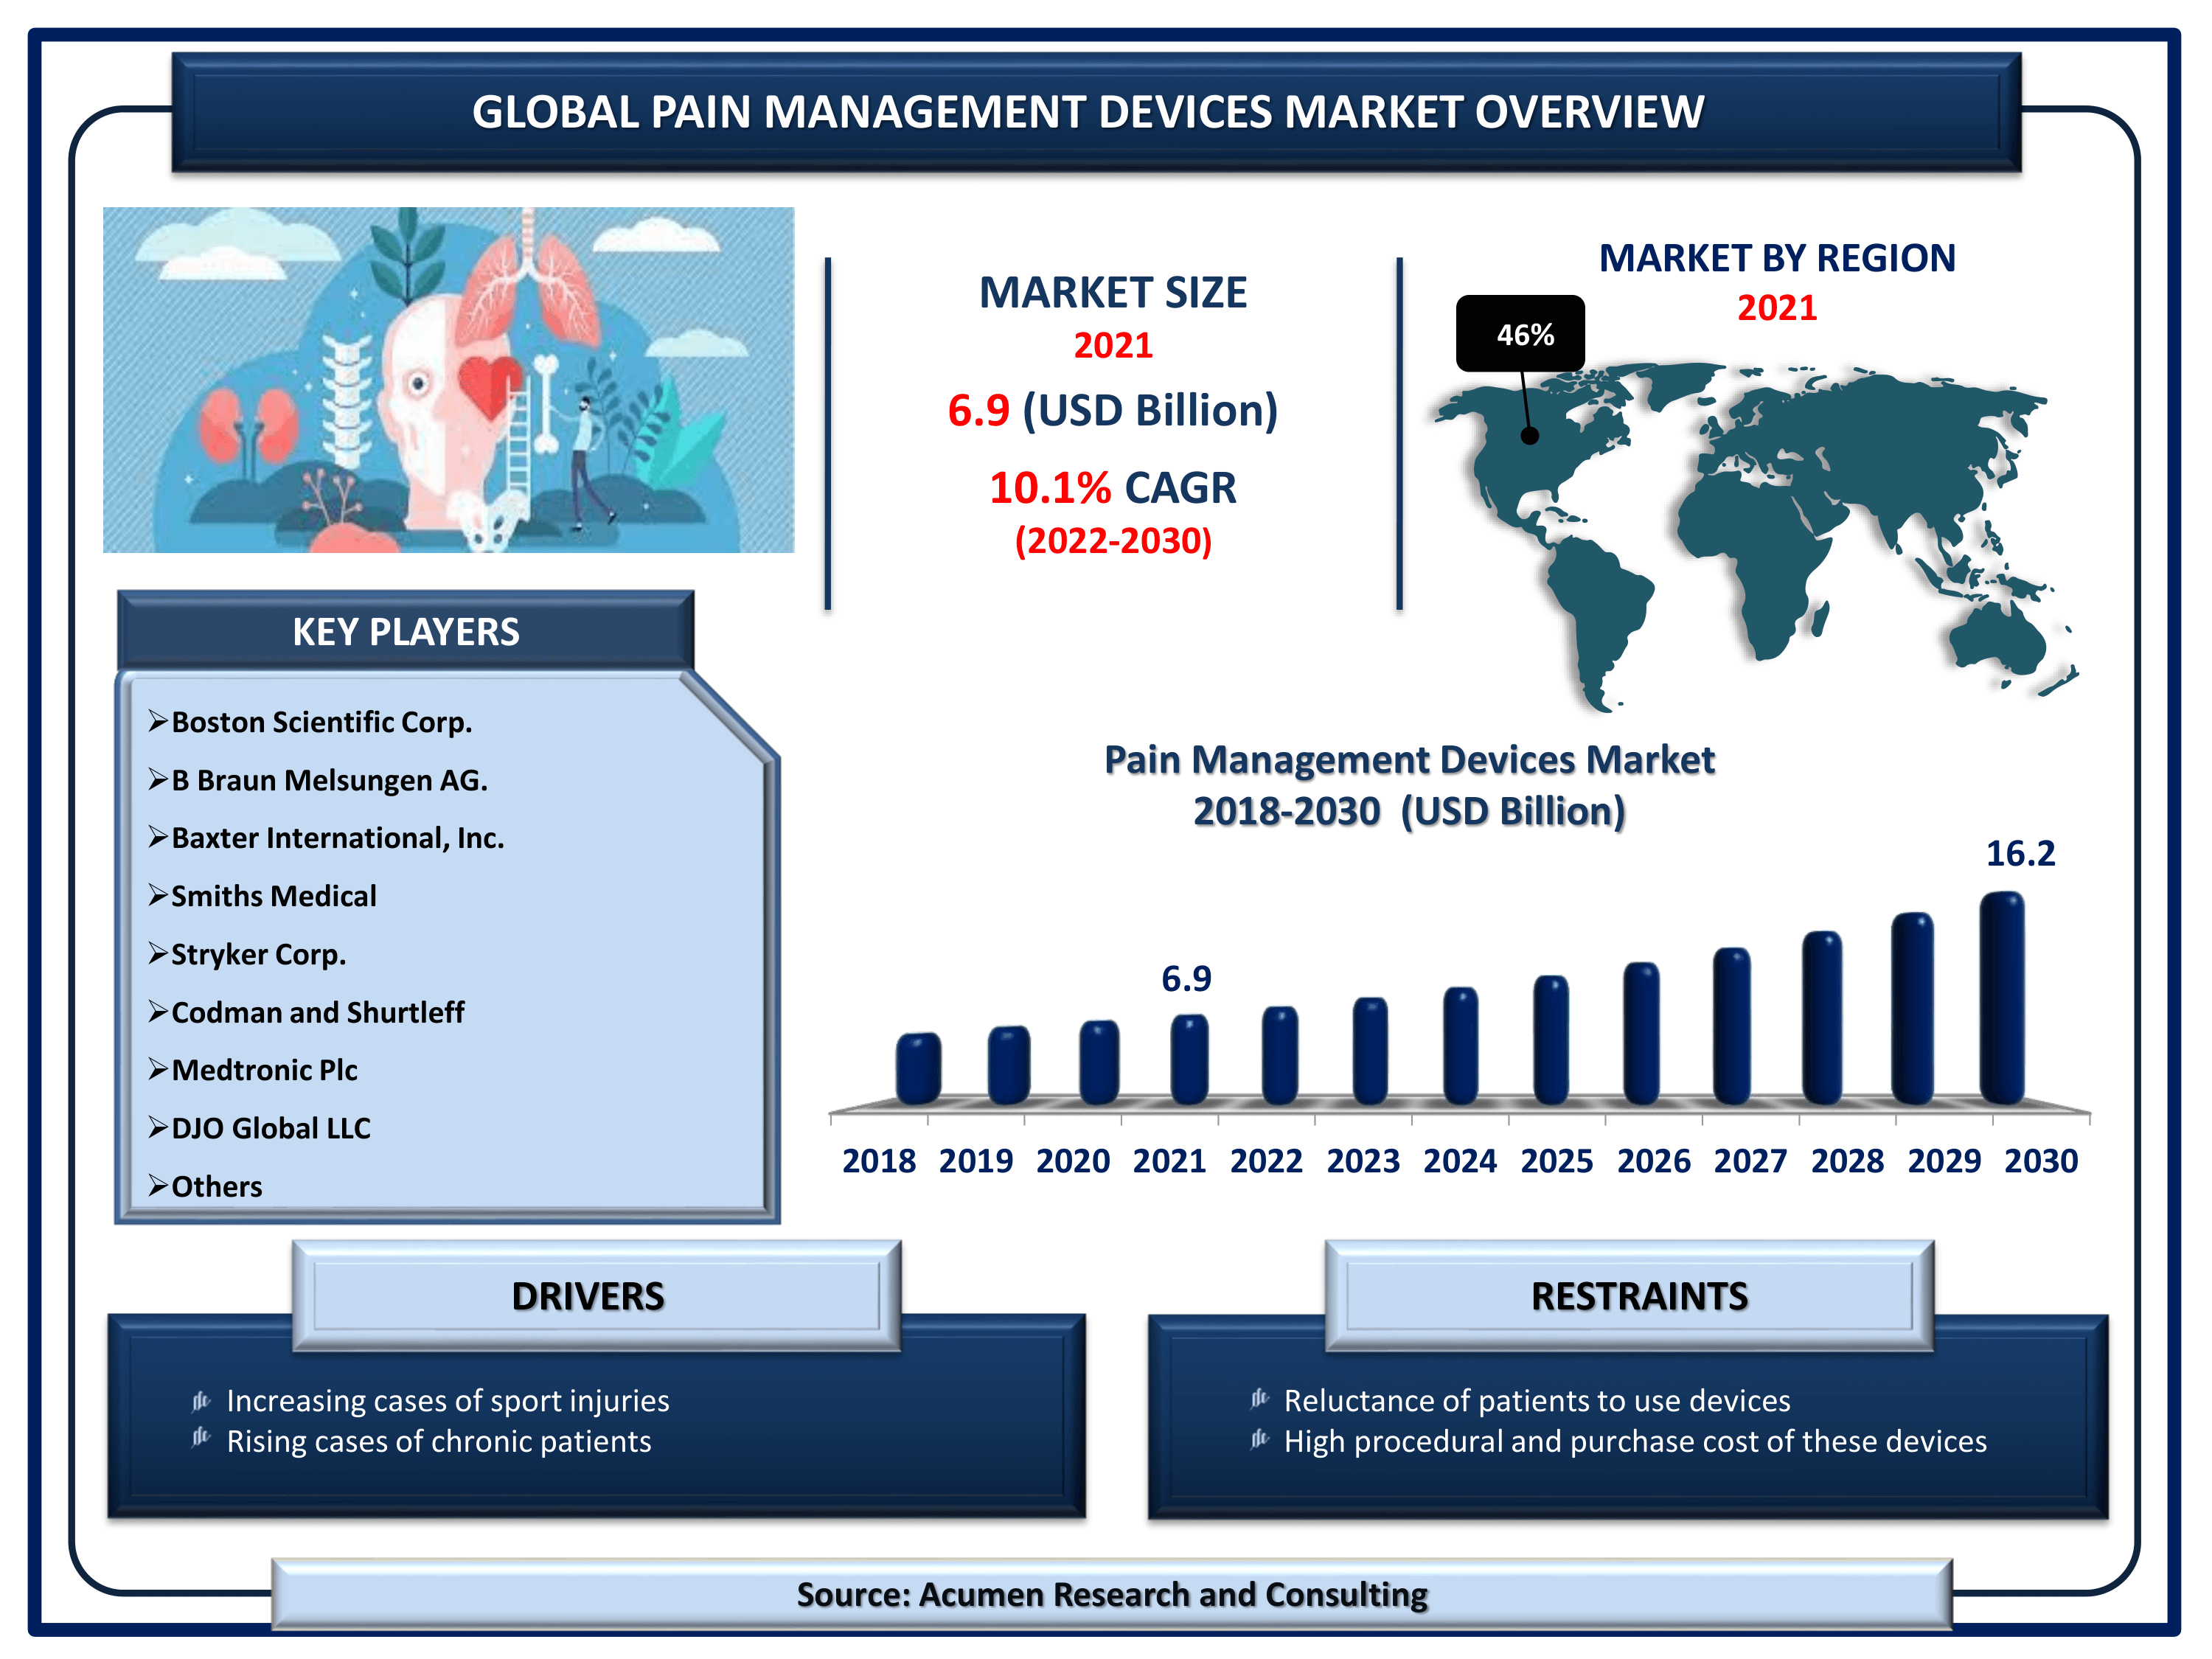 Global pain management devices market revenue is estimated to reach USD 16.2 Billion by 2030 with a CAGR of 10.1% from 2022 to 2030